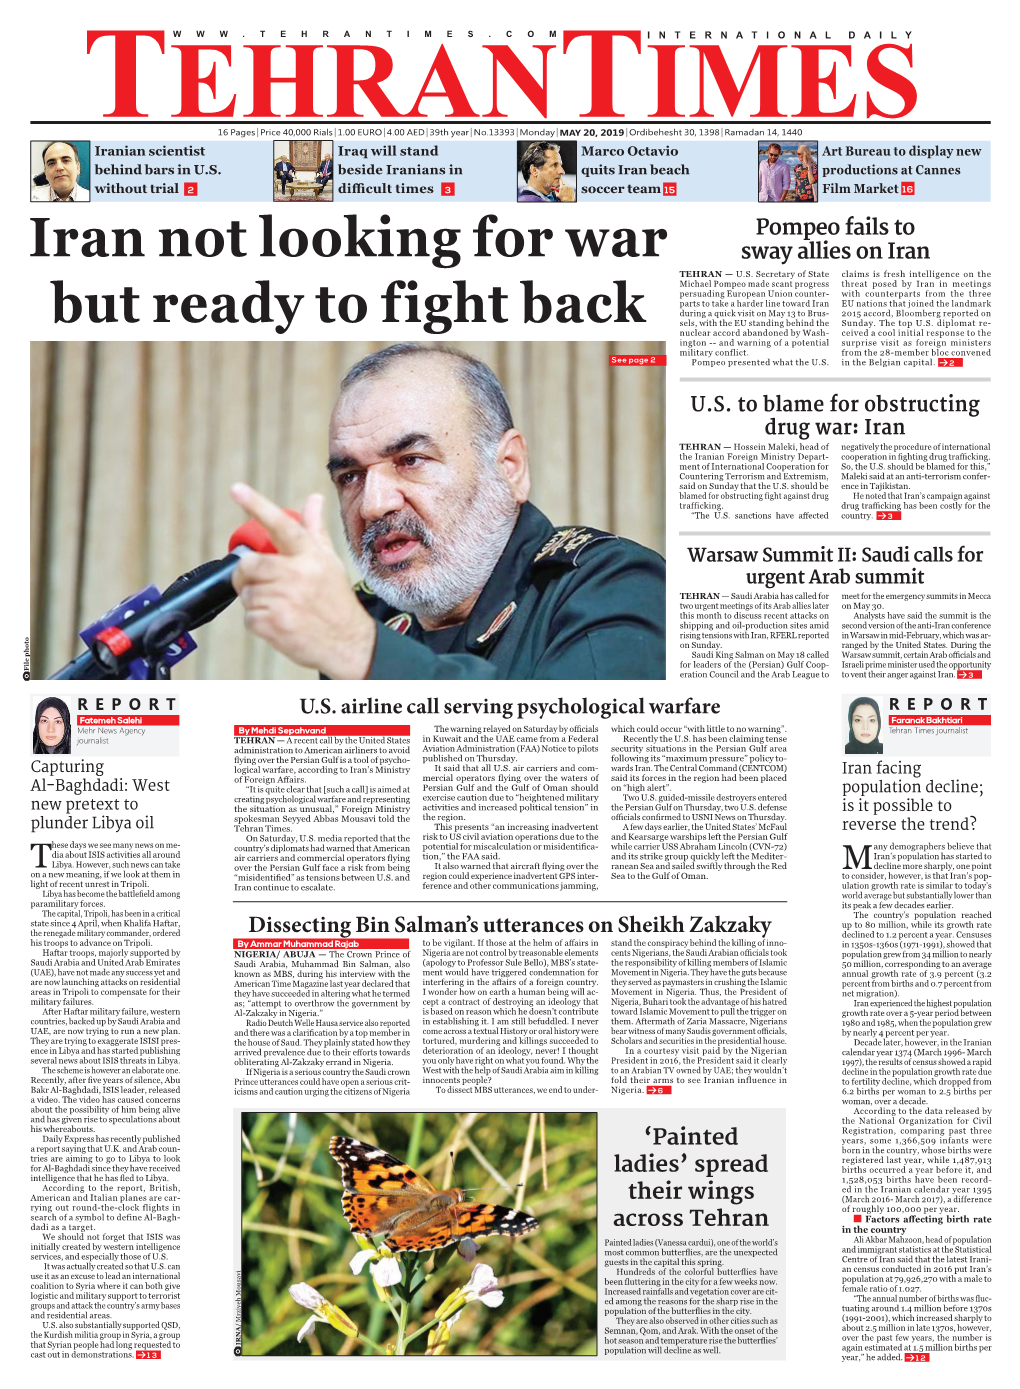 Iran Not Looking for War but Ready to Fight Back